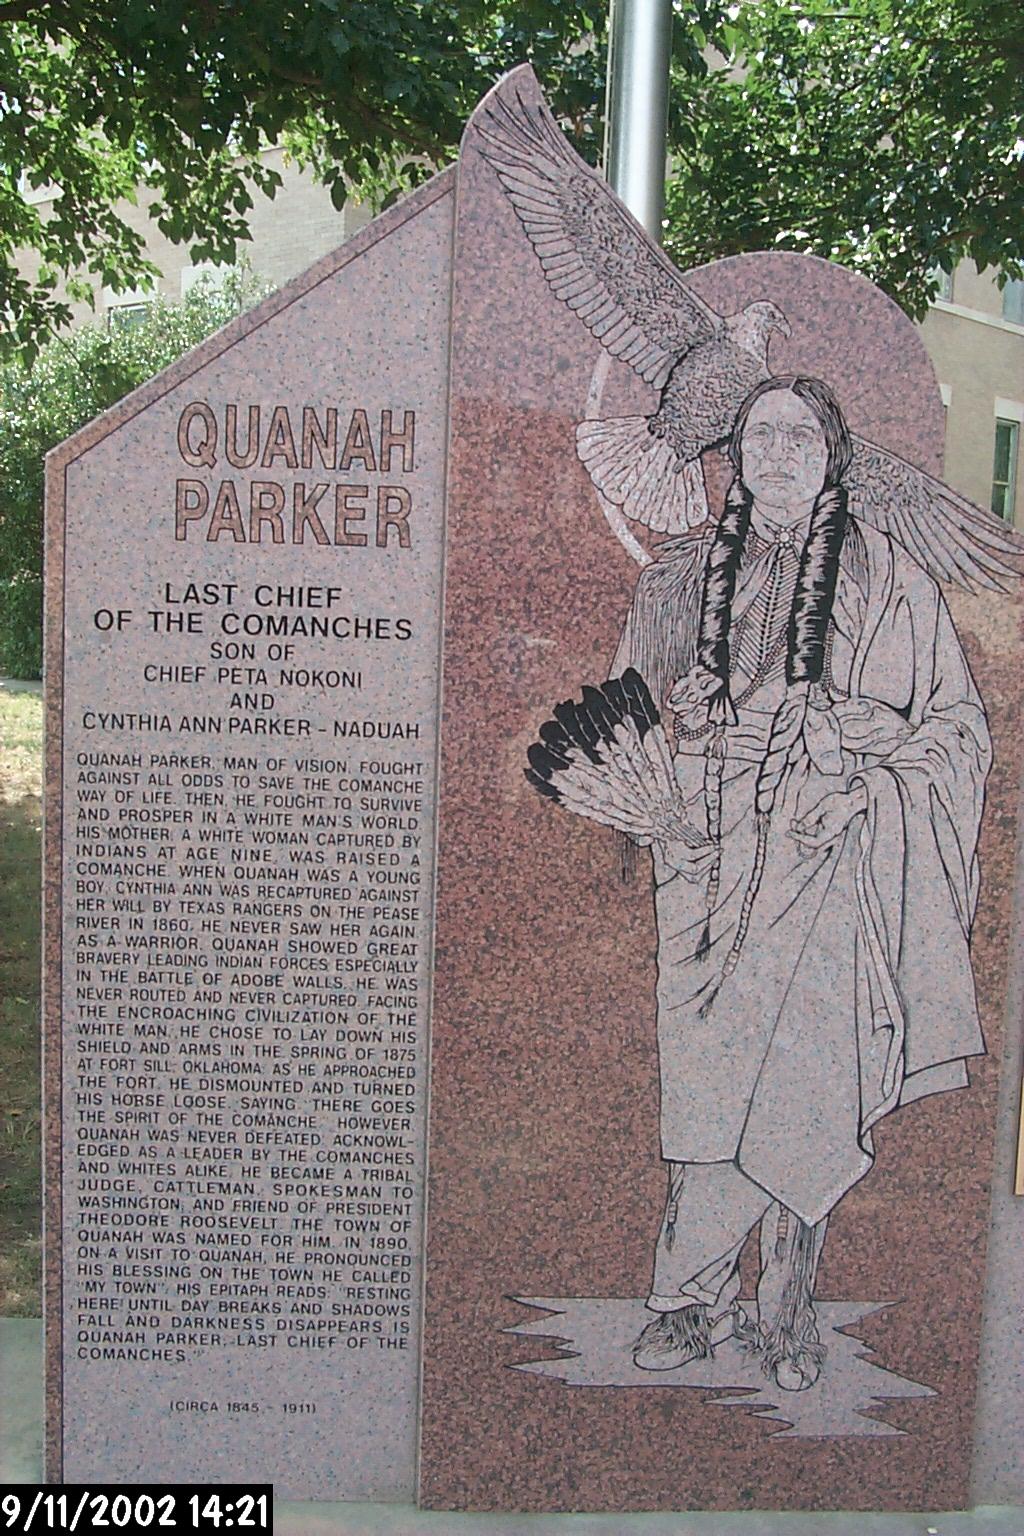 Quanah Parker, the last chief of the Comanches